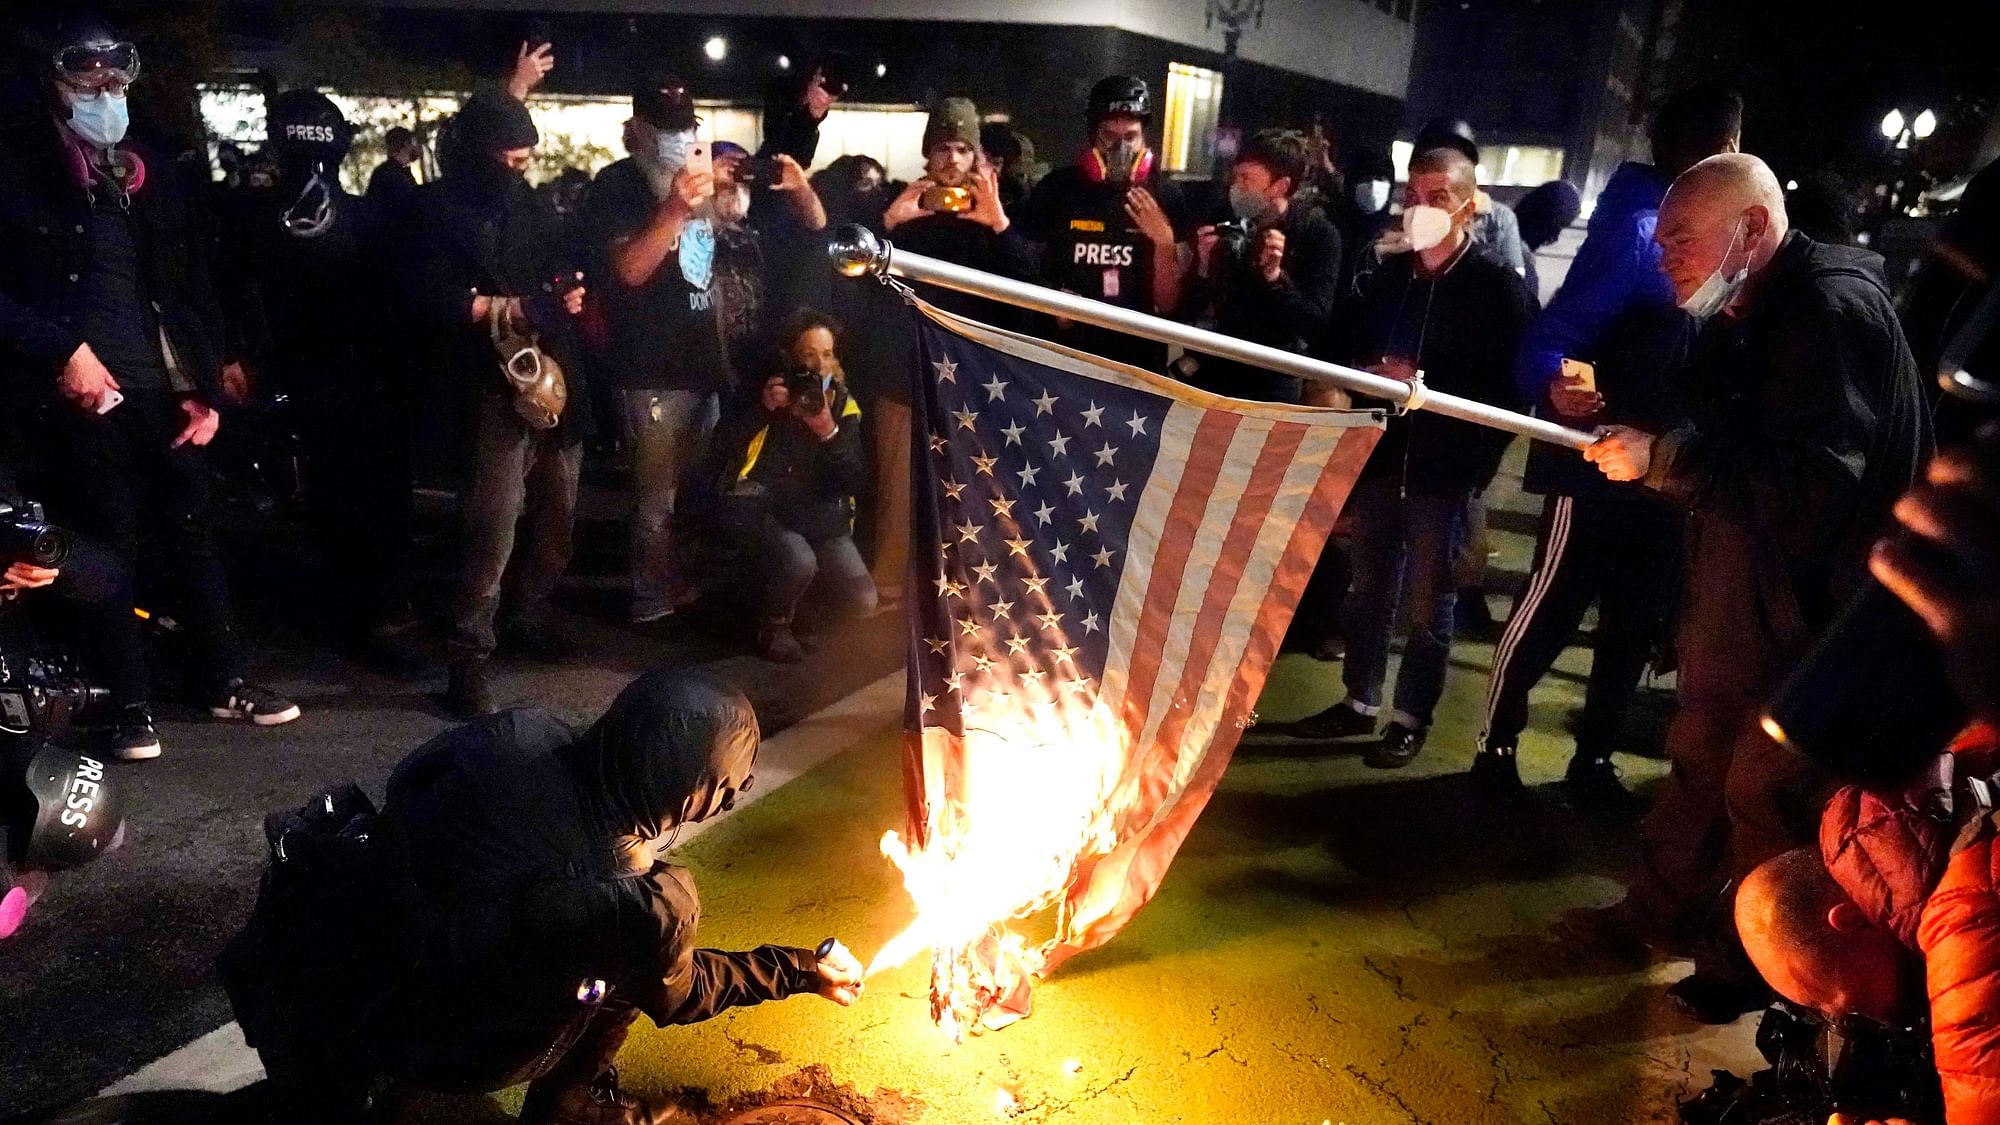 A protester lights an American flag on fire during a demonstration Wednesday, Nov. 4, 2020, in Portland. Image used for representation.